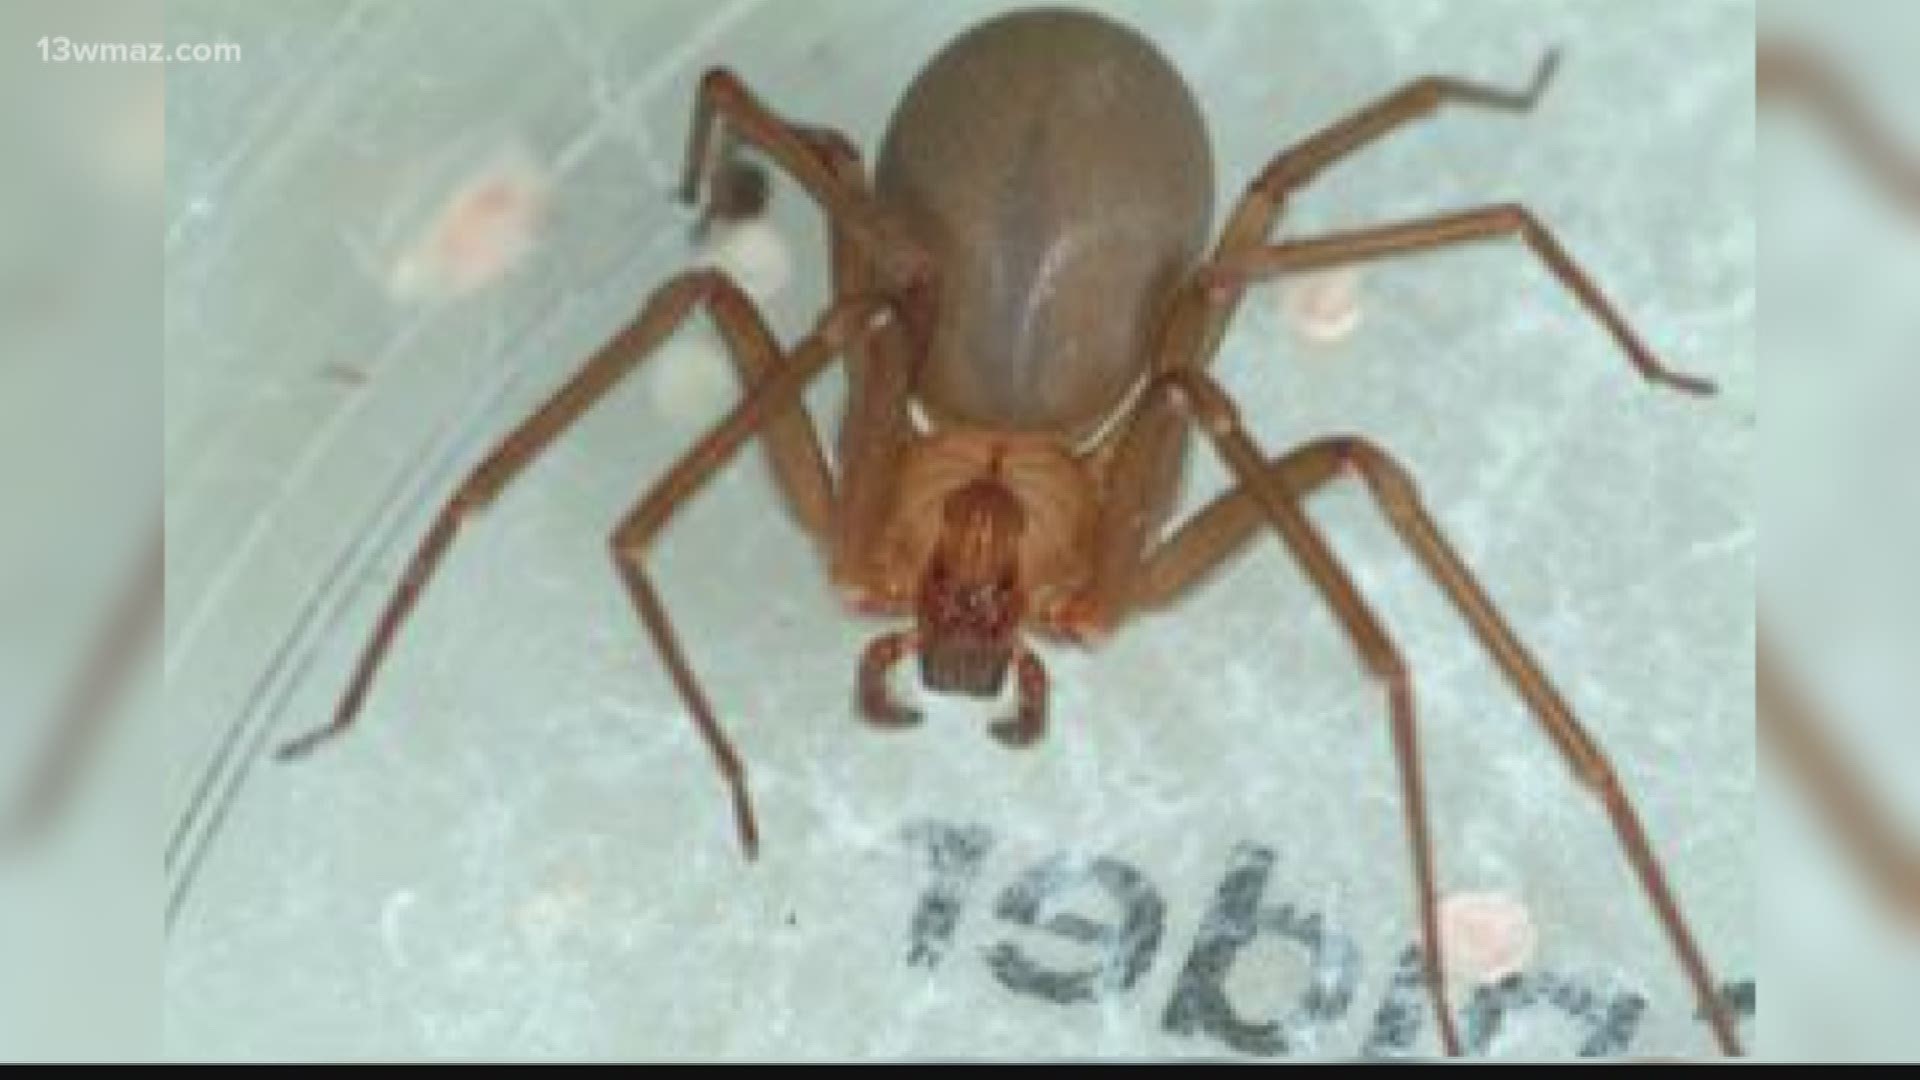 What you need to know about venomous Brown Recluse spiders